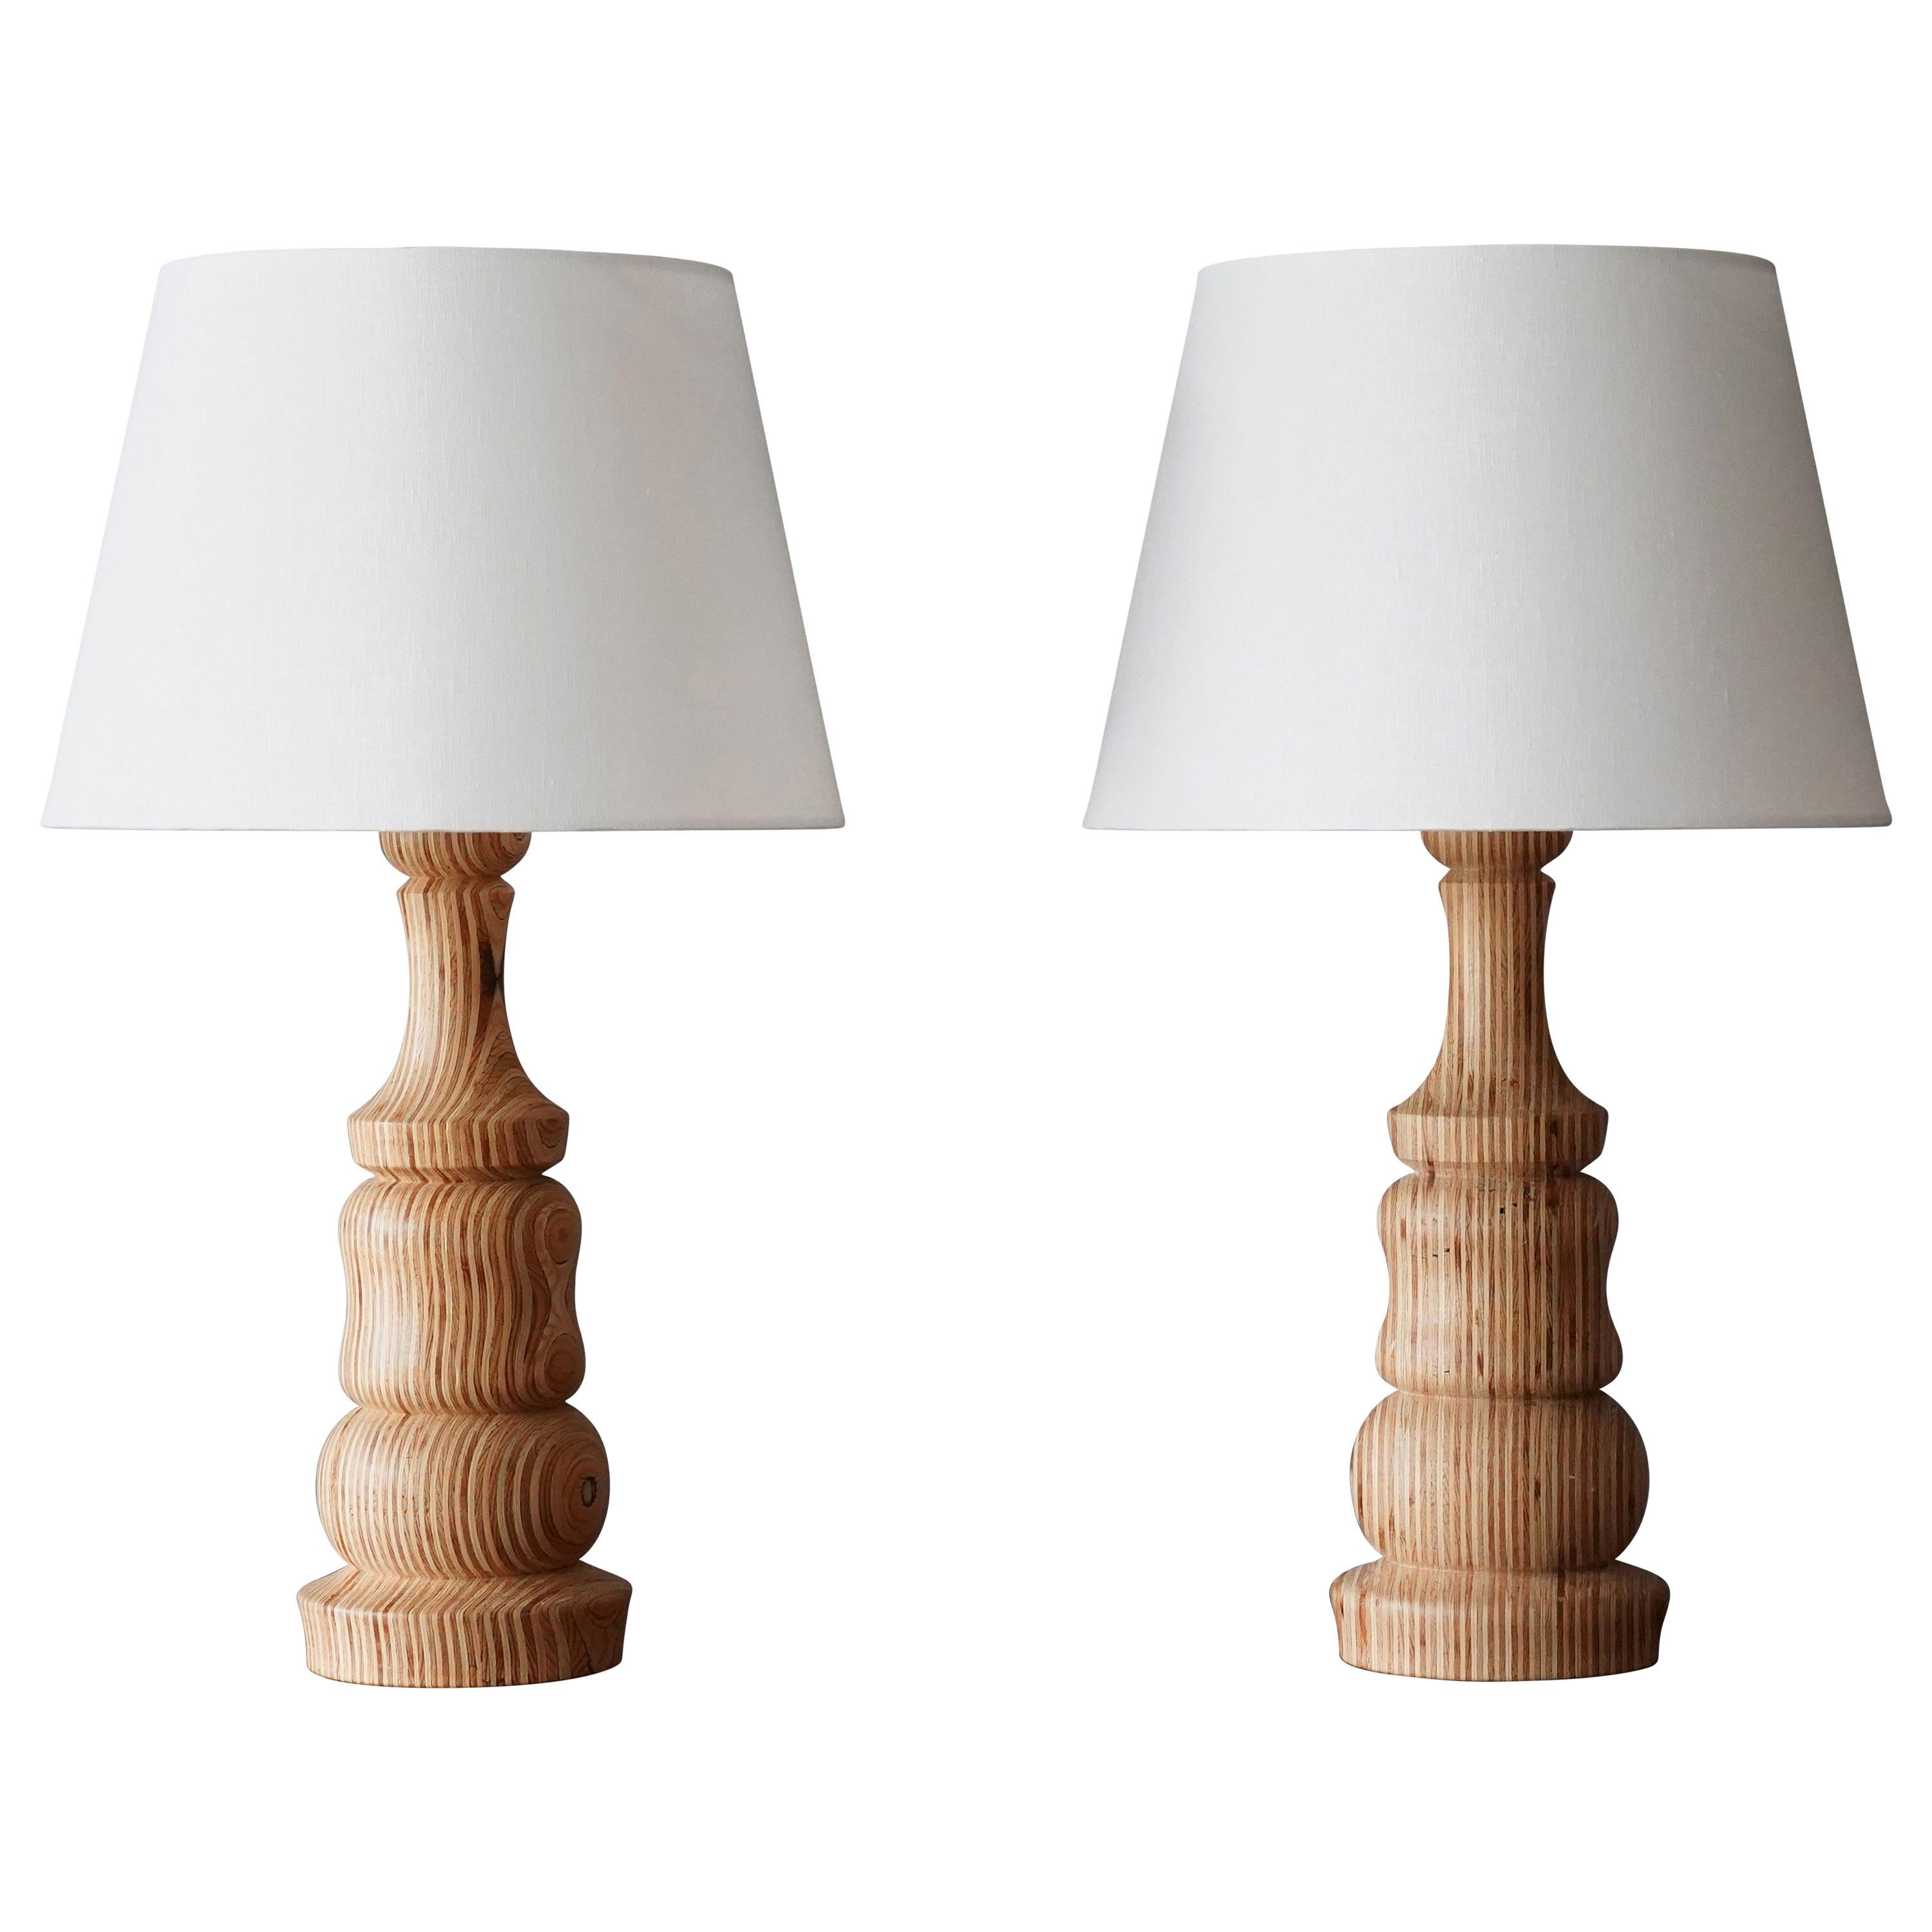 Swedish, Modernist Table Lamps, Laminated Turned Wood, Fabric, Sweden, 1960s